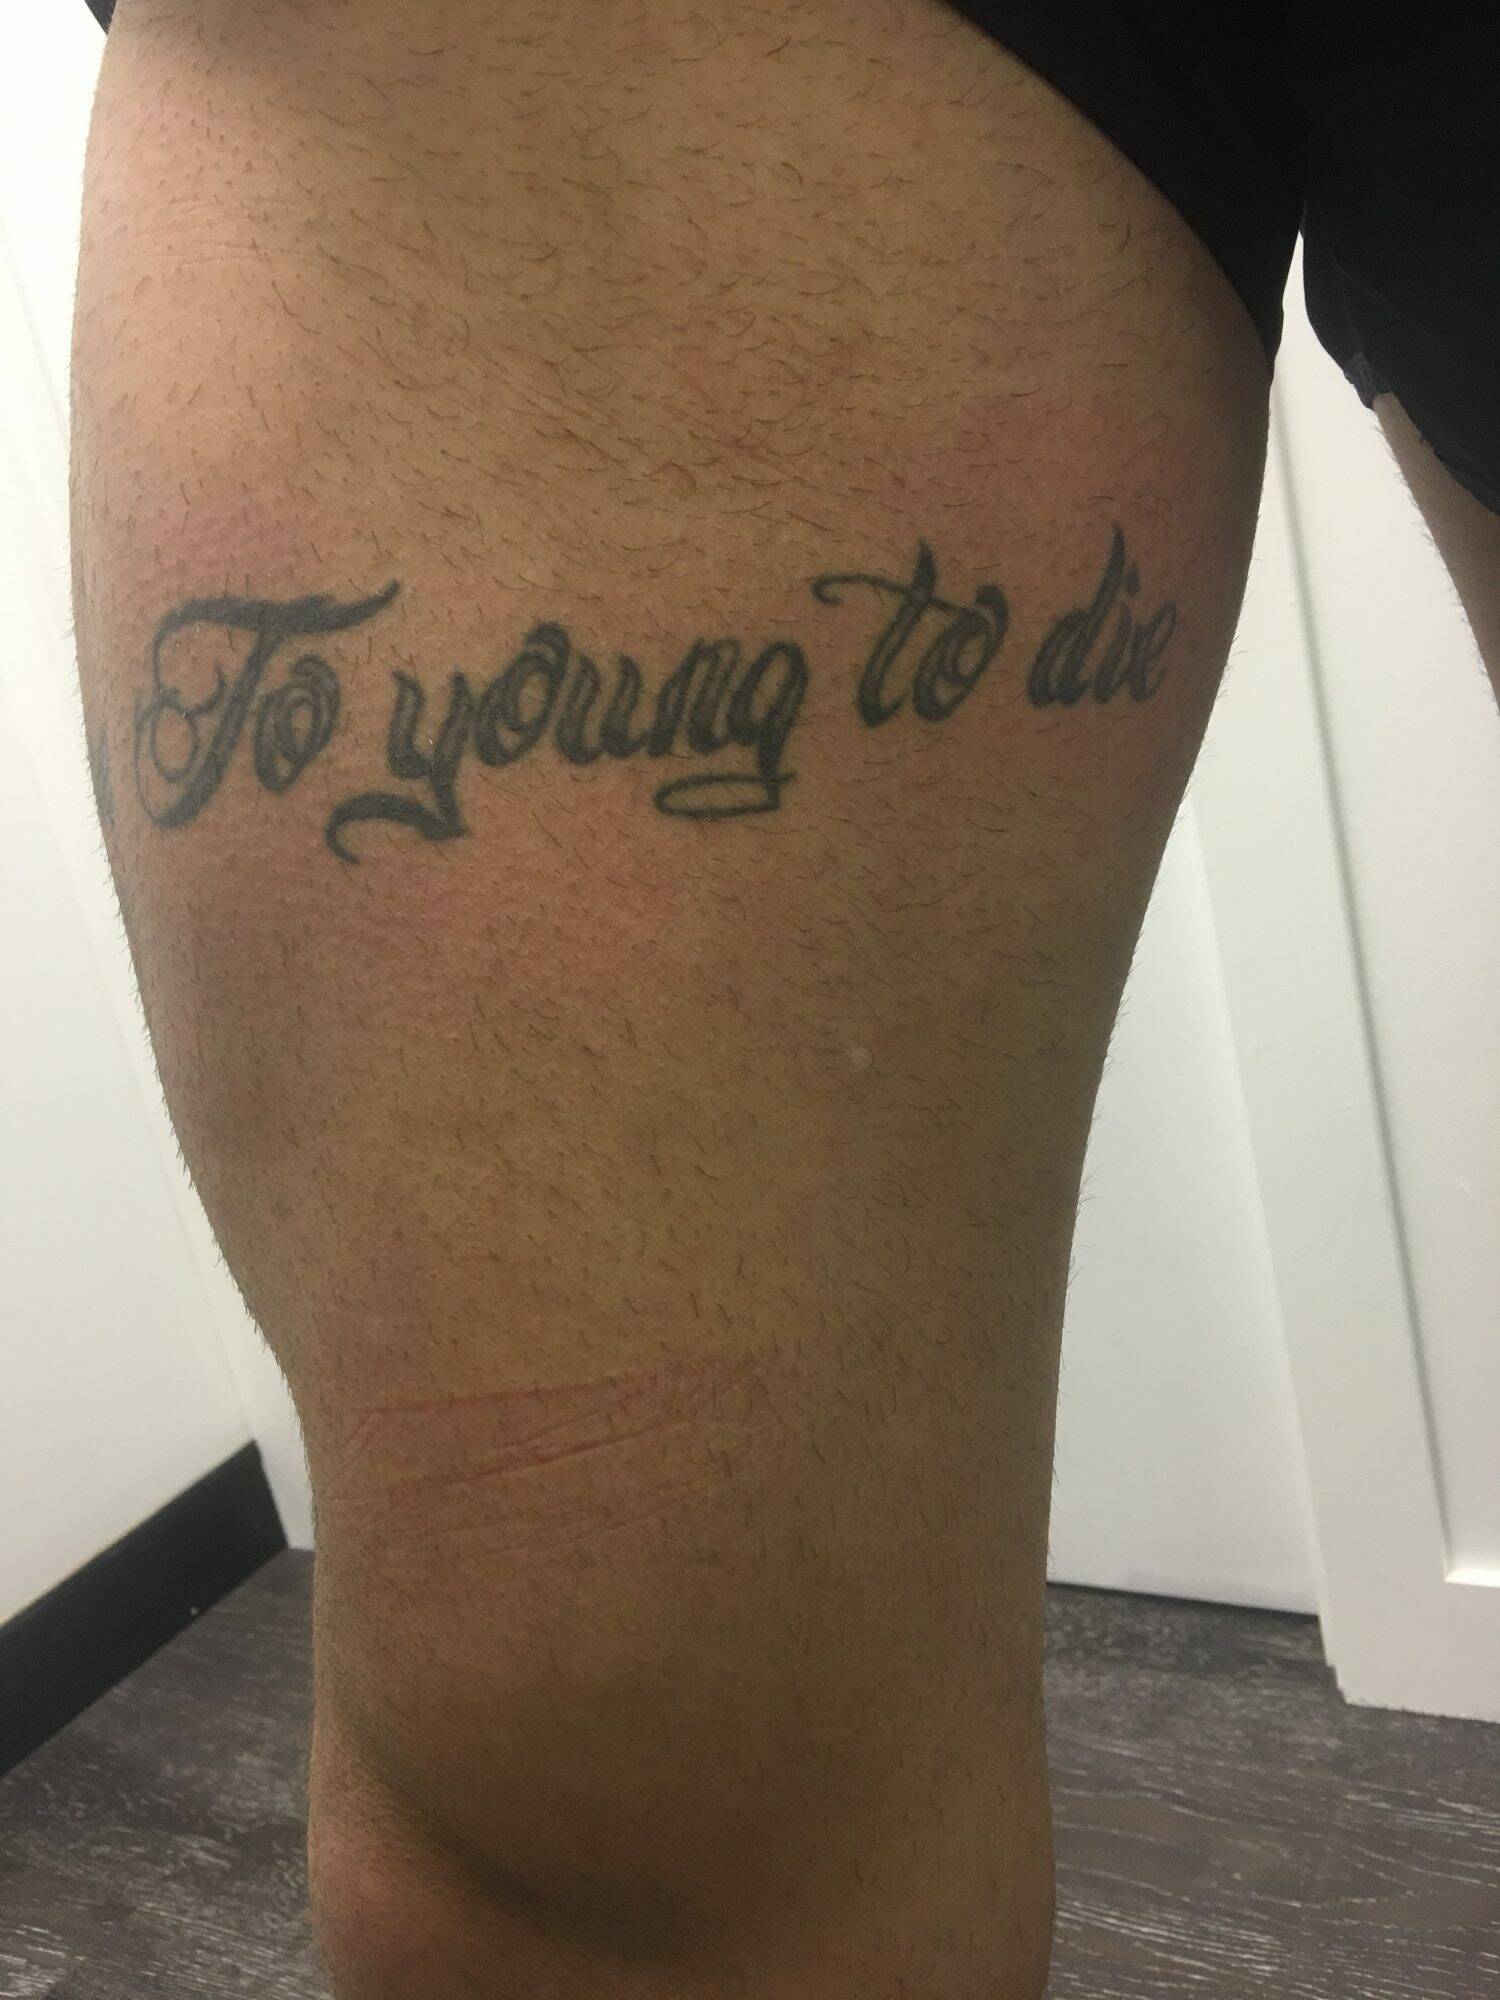 Canberra tattoo removal business booming thanks to 'ragrets' and spelling  fails | The Canberra Times | Canberra, ACT